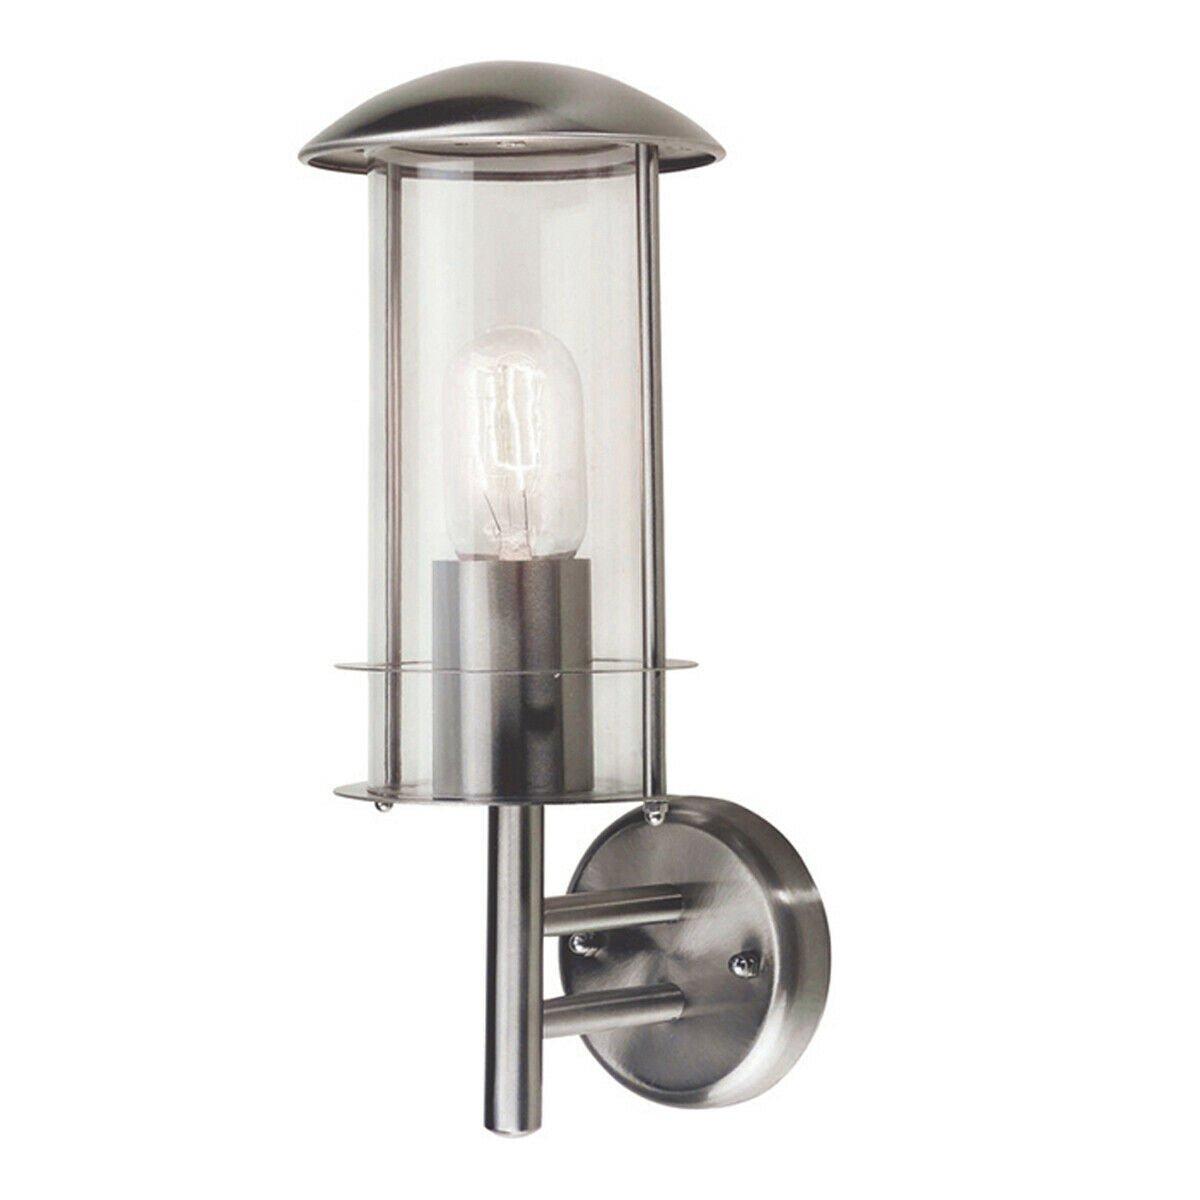 Outdoor IP44 Wall Light Glass Shade Stainless Steel LED E27 60W